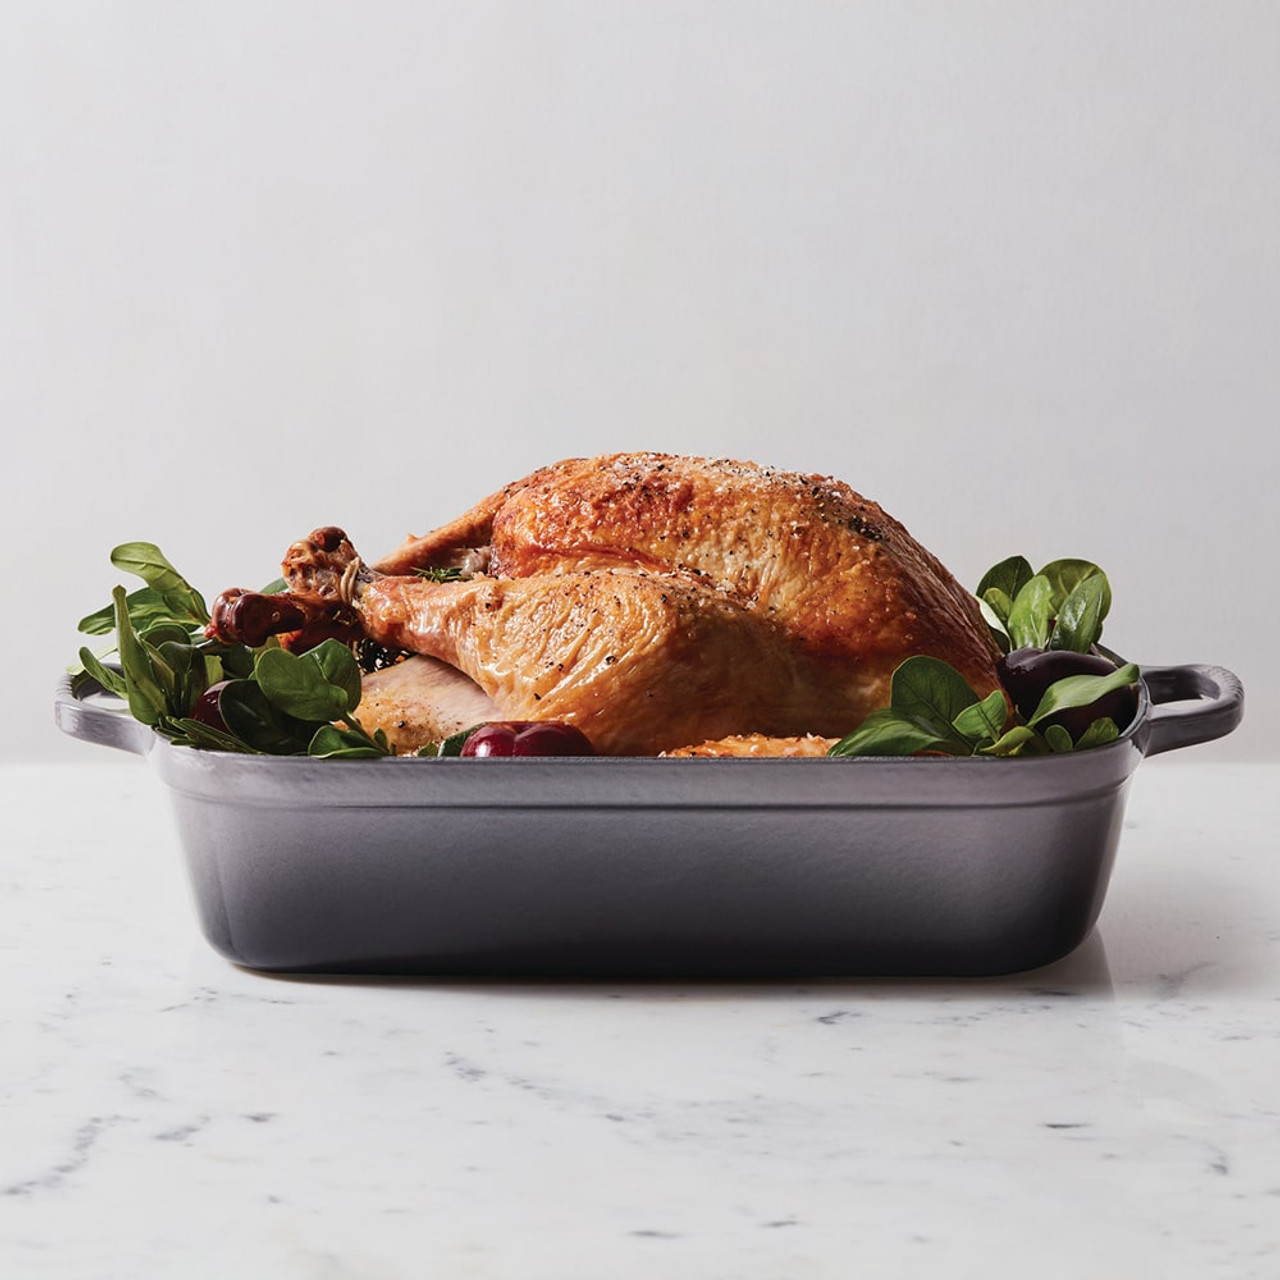 Le Creuset Signature Roaster in Oyster